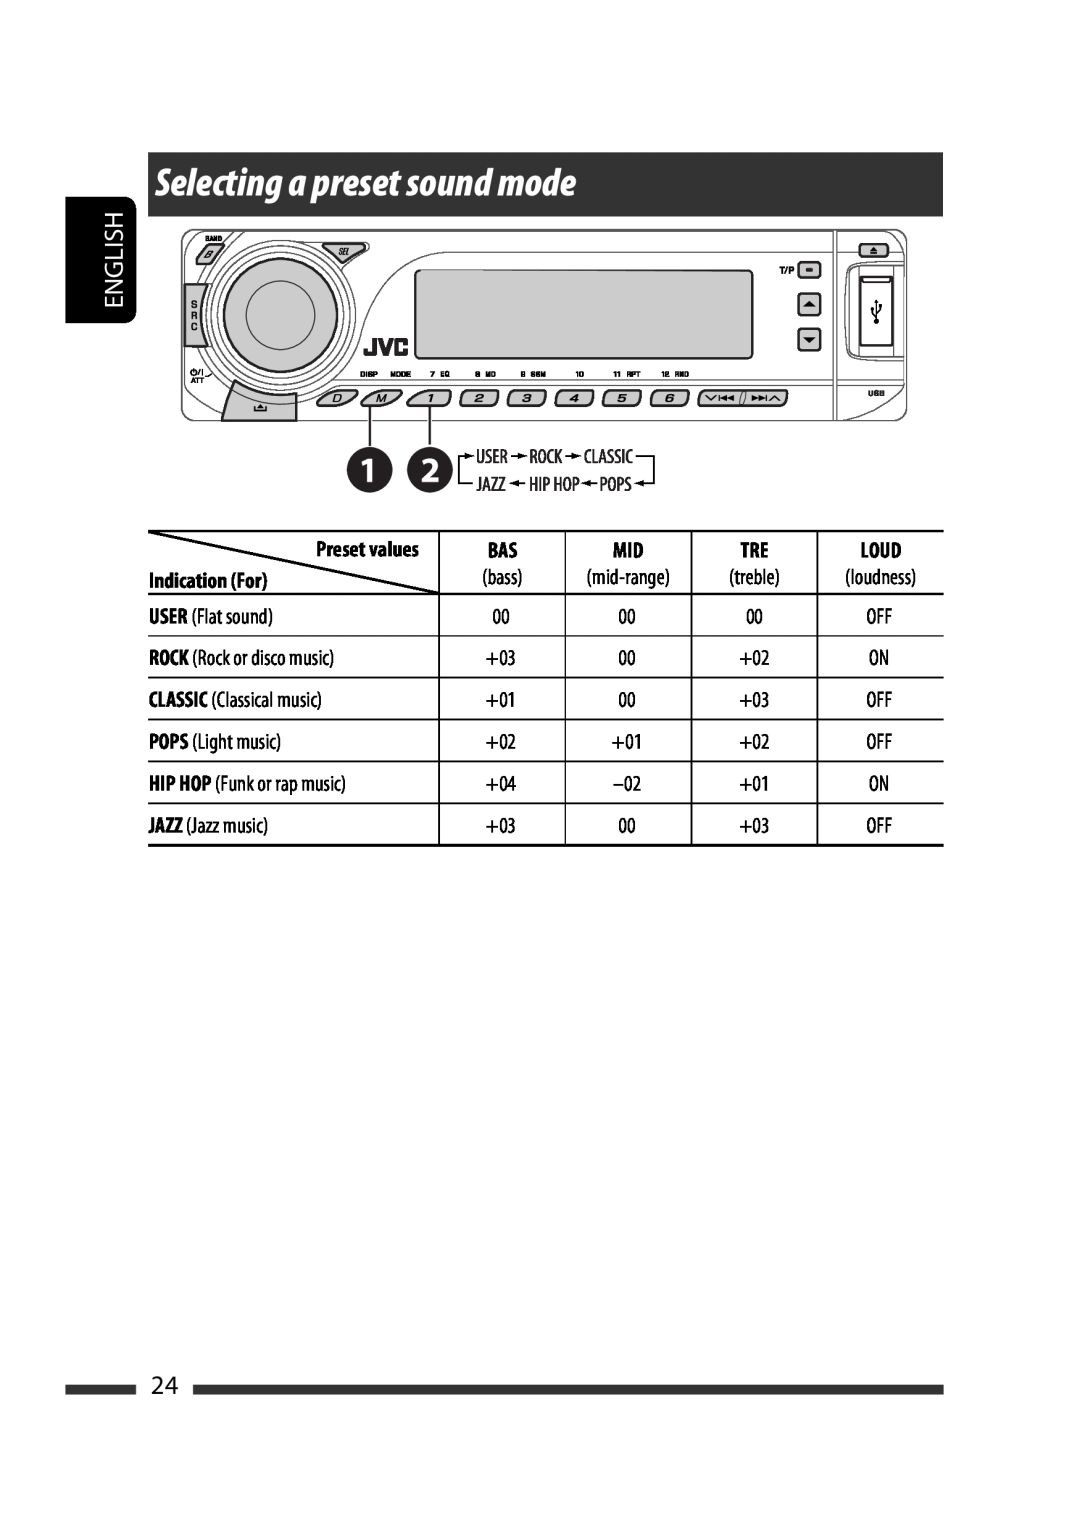 JVC KD-G731 manual Selecting a preset sound mode, Loud, Indication For, English, ROCK Rock or disco music, Preset values 